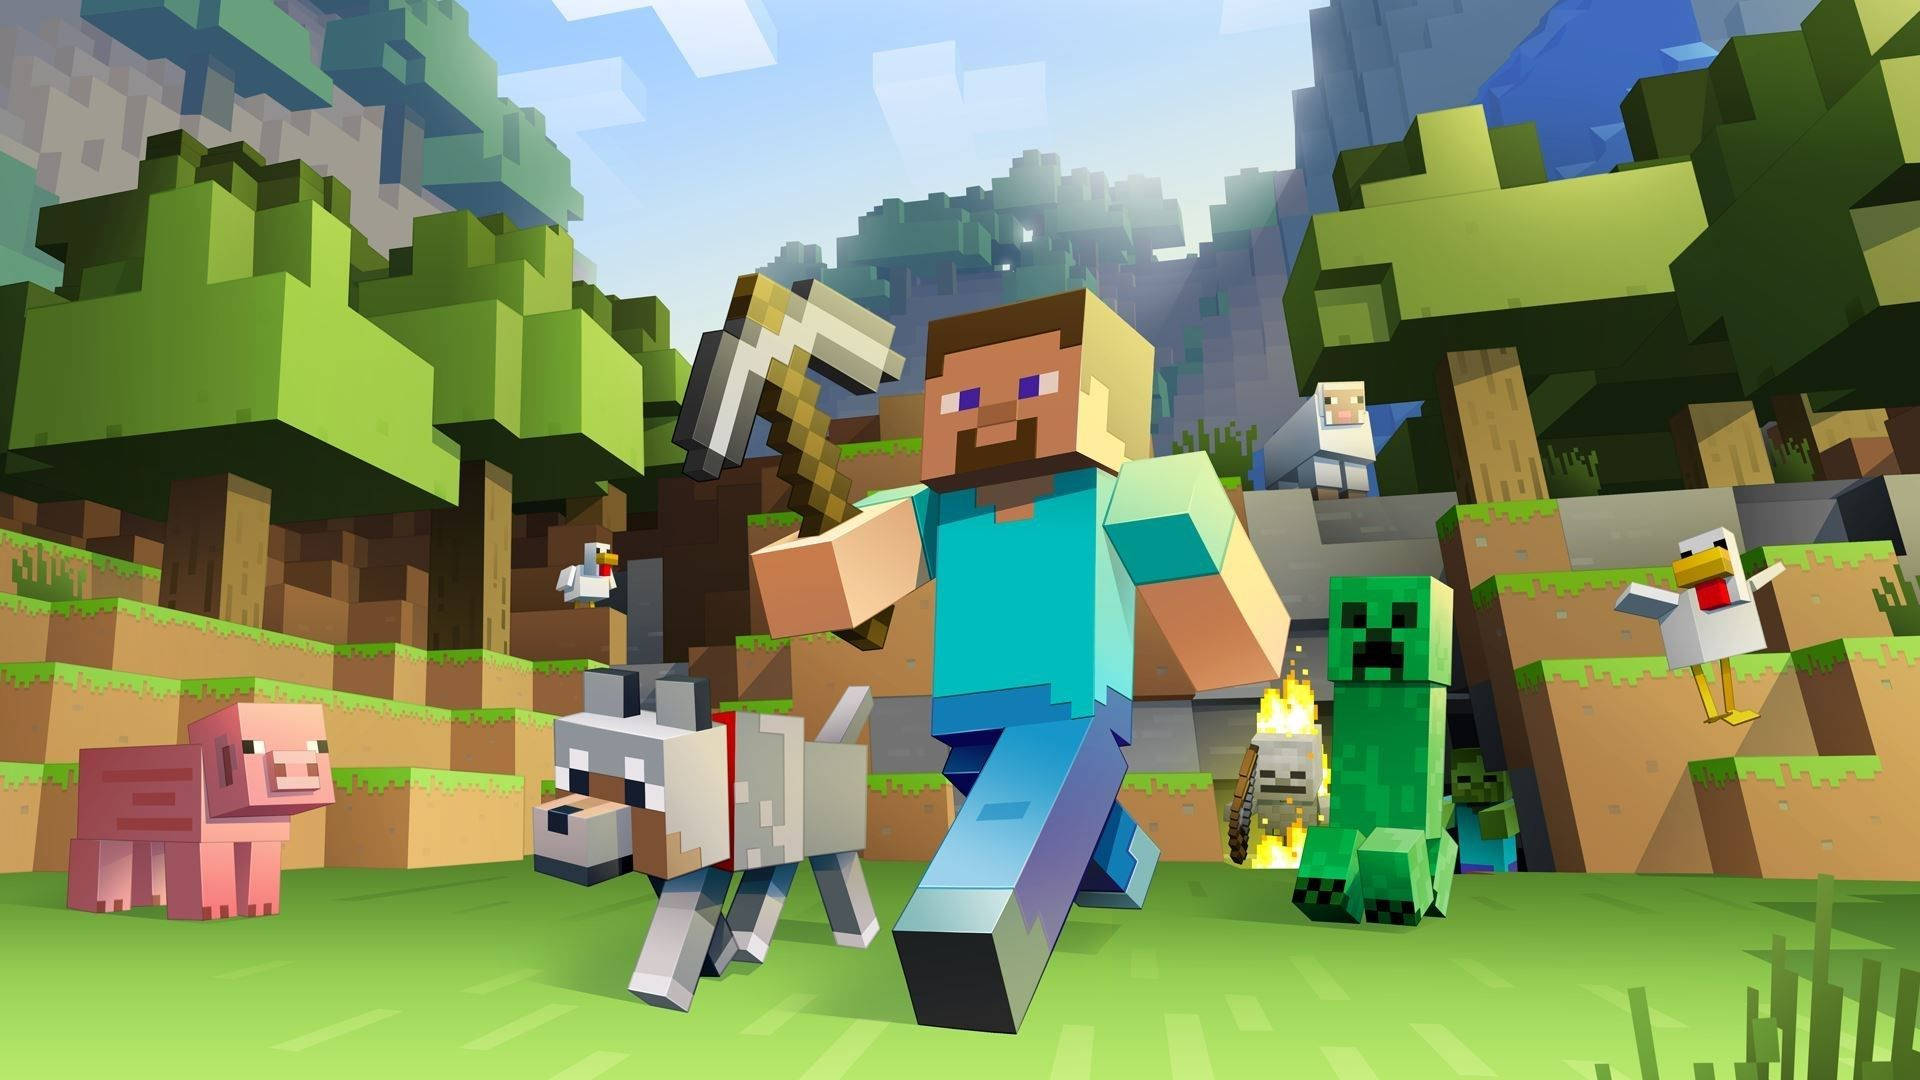 Download Minecraft Skype Girl Team, Minecraft, Skype, Young woman, Team  Wallpaper in 2560x1920 Resolution